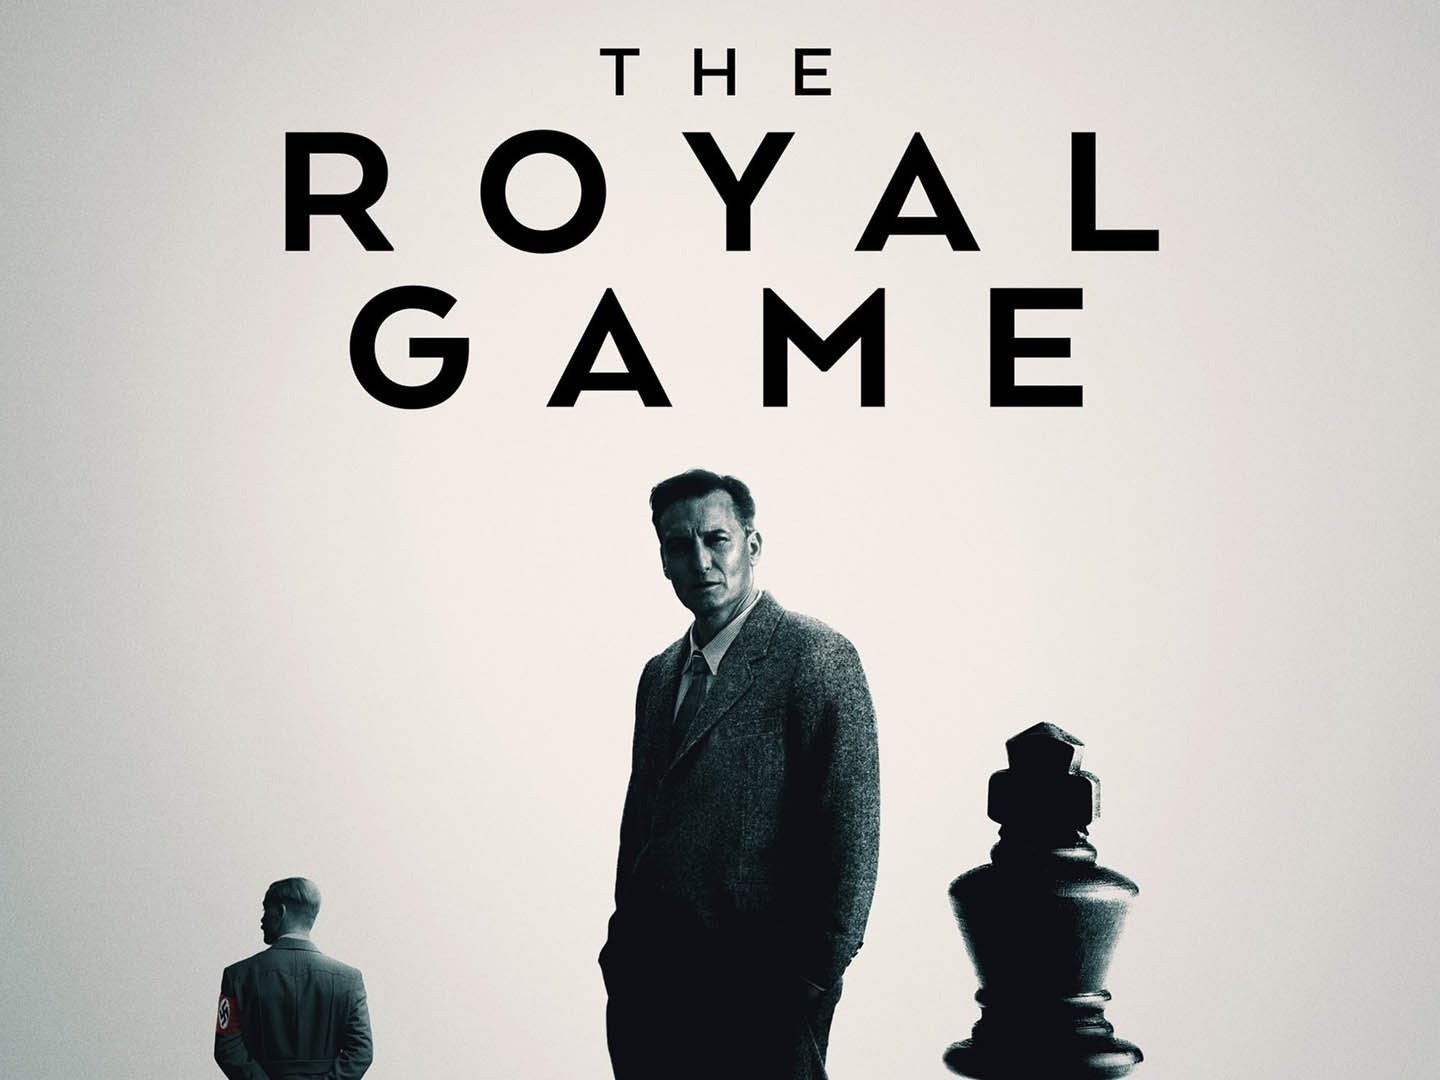 The Royal Game Movie Print Chess Story Film Wall Art Home Decor - POSTER  20x30